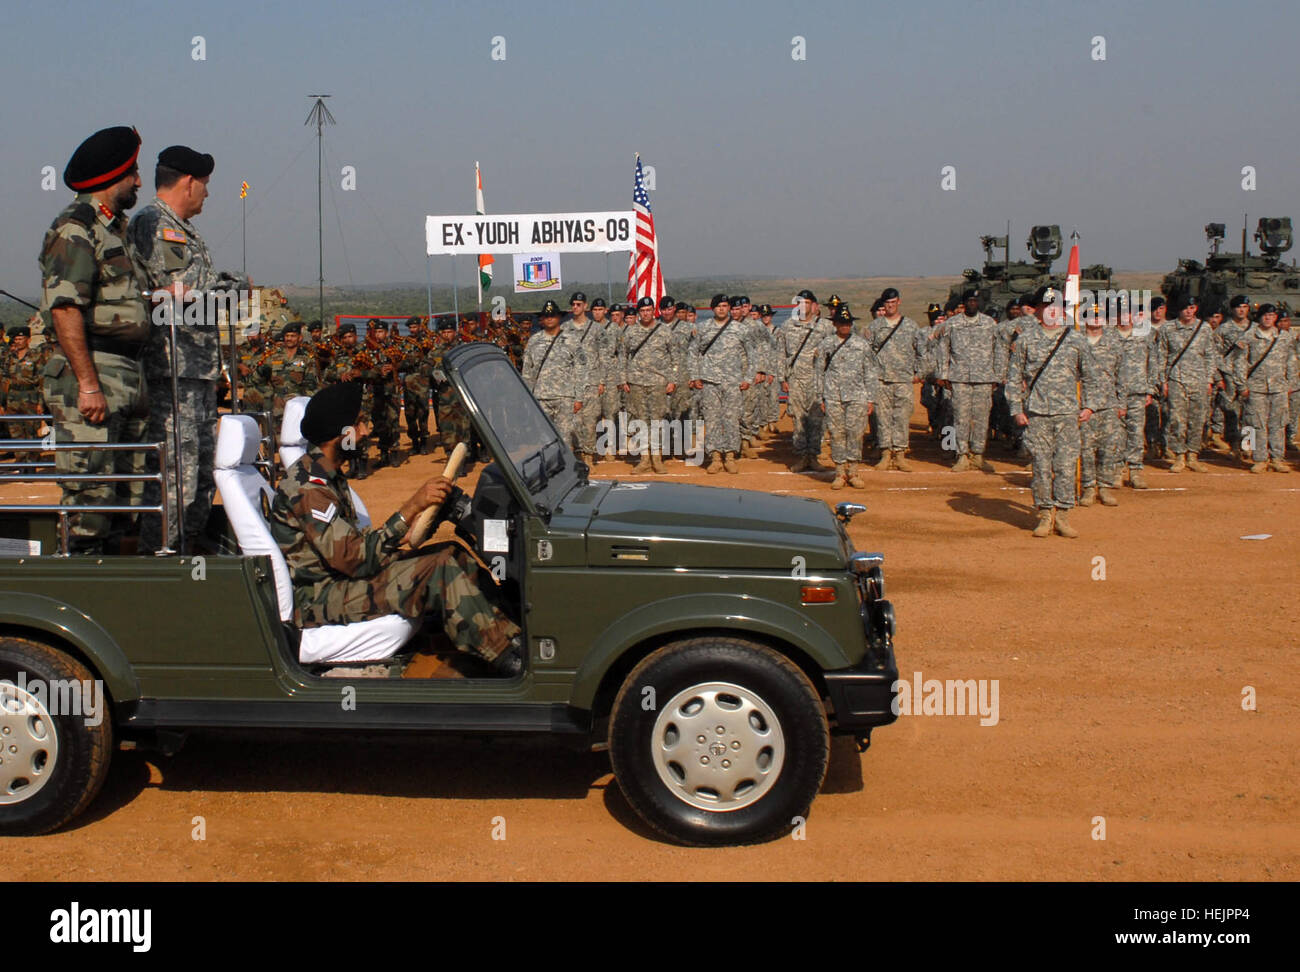 CAMP BUNDELA, India (Oct. 27, 2009)  – Indian Army Lt. Gen. A.S. Sekhon, Indian army director of general military operations, and U.S. Army Lt. Gen. Benjamin R. Mixon, commanding general, U.S. Army, Pacific, conduct a pass and review of the troops during the closing ceremony of Exercise Yudh Abyas 09, a bilateral exercise involving the Armies of India and the United States. (Photo by Staff Sgt. Crista Yazzie, U.S. Army, Pacific Public Affairs) Indian Army Lt. Gen. A.S. Sekhon and U.S. Army Lt. Gen. Benjamin R. Mixon conduct a pass and review of the troops during the closing ceremony of Yudh Ab Stock Photo